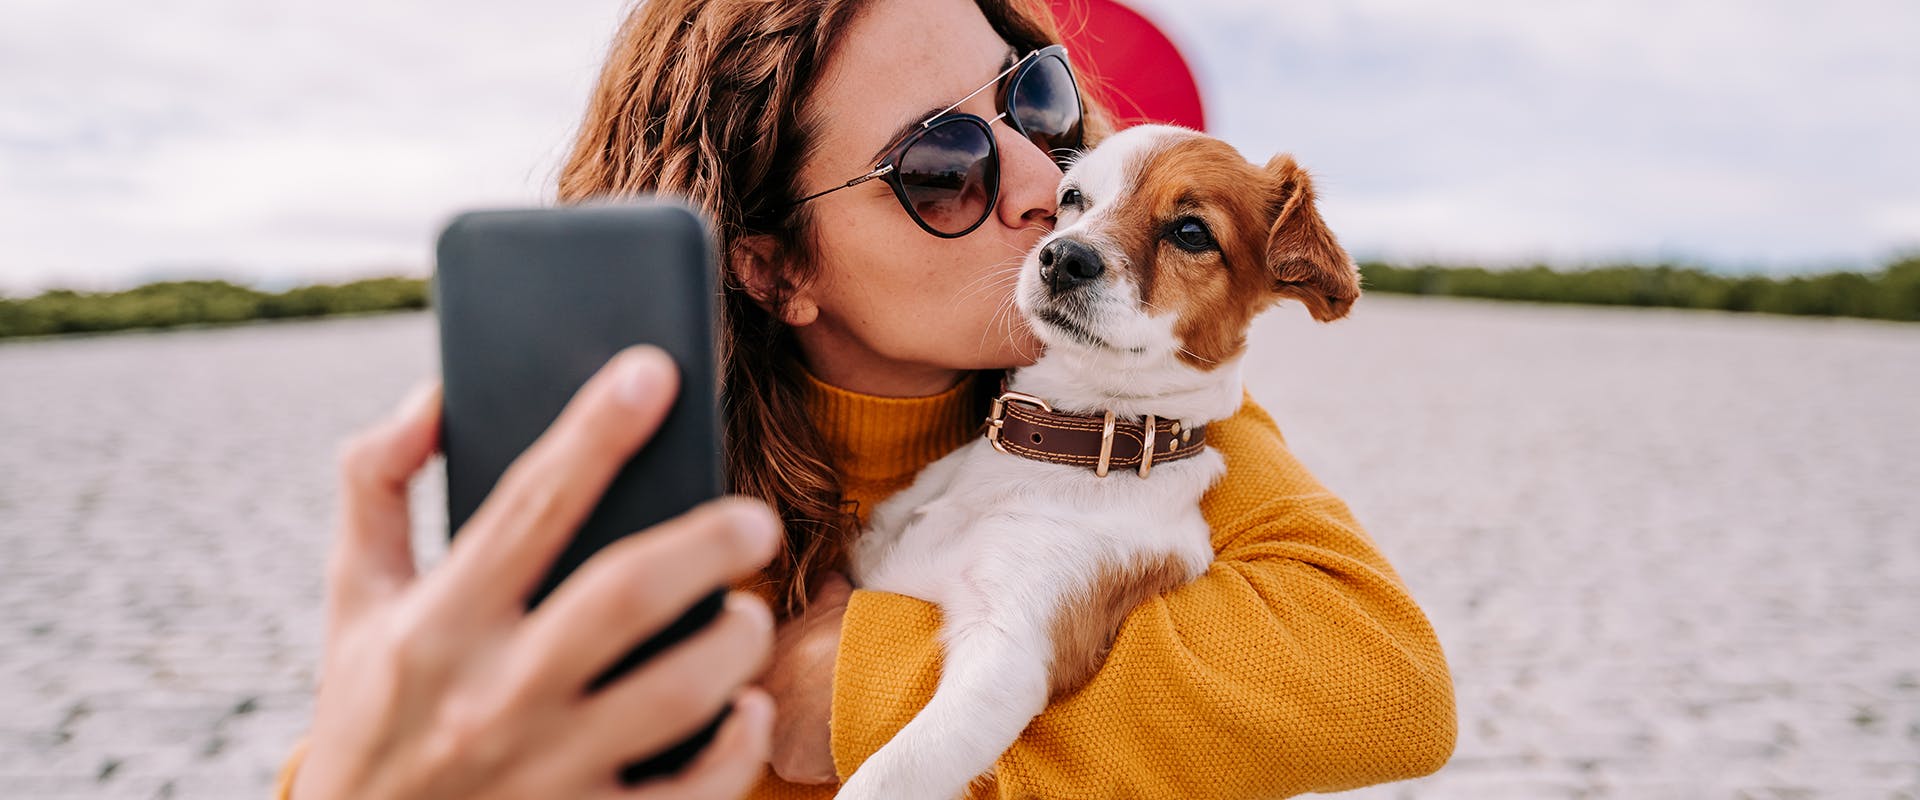 A woman holding a dog in her arms while taking a selfie